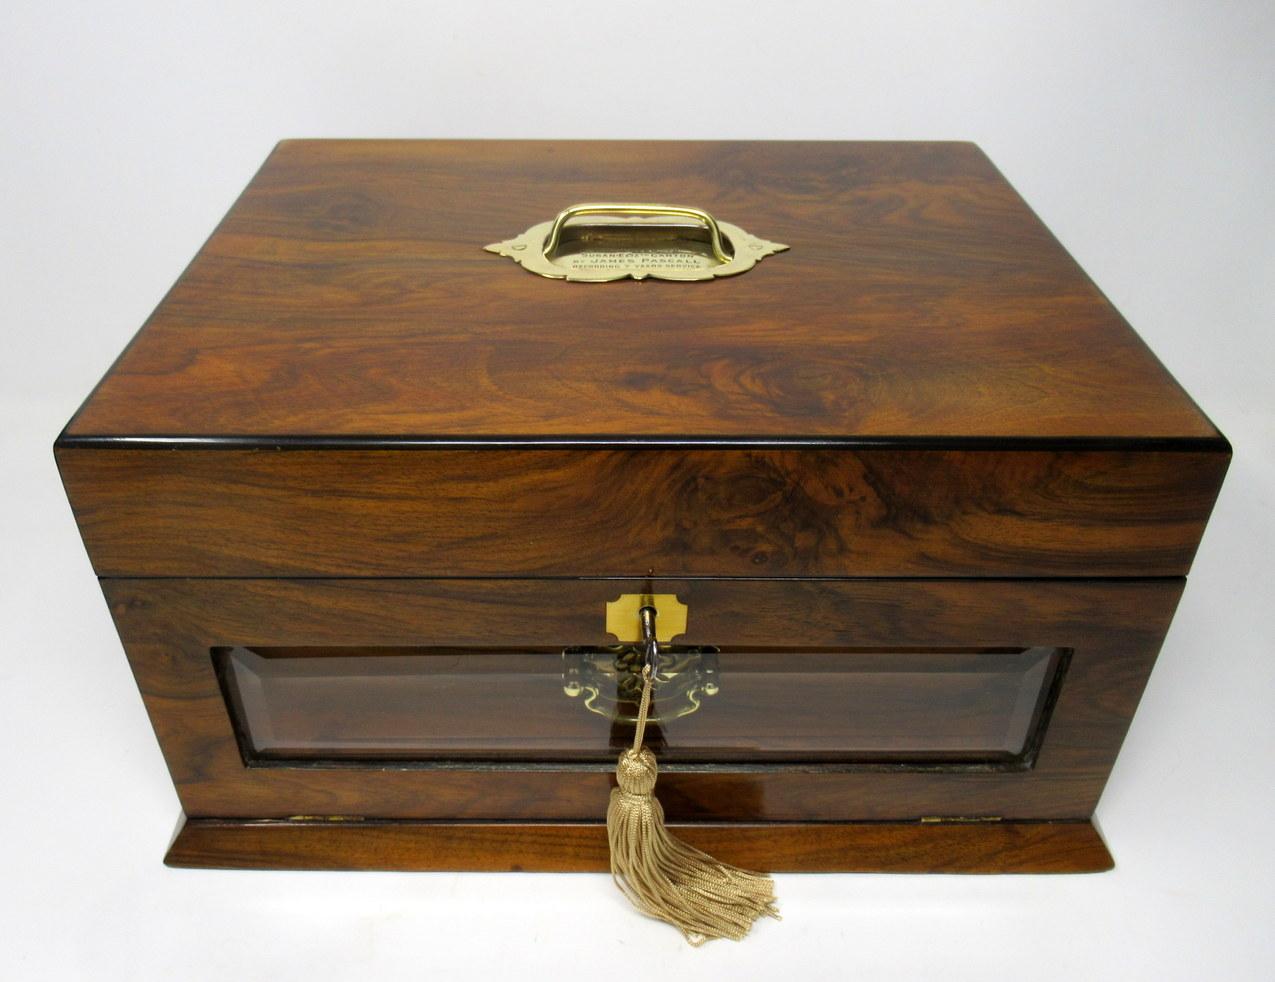 Absolutely stunning well figured walnut lady’s jewlery casket or gentleman’s documents box of outstanding quality, last quarter of the 19th century.

This exceptional piece in stunning polished walnut with ebony stringing to cover. The front